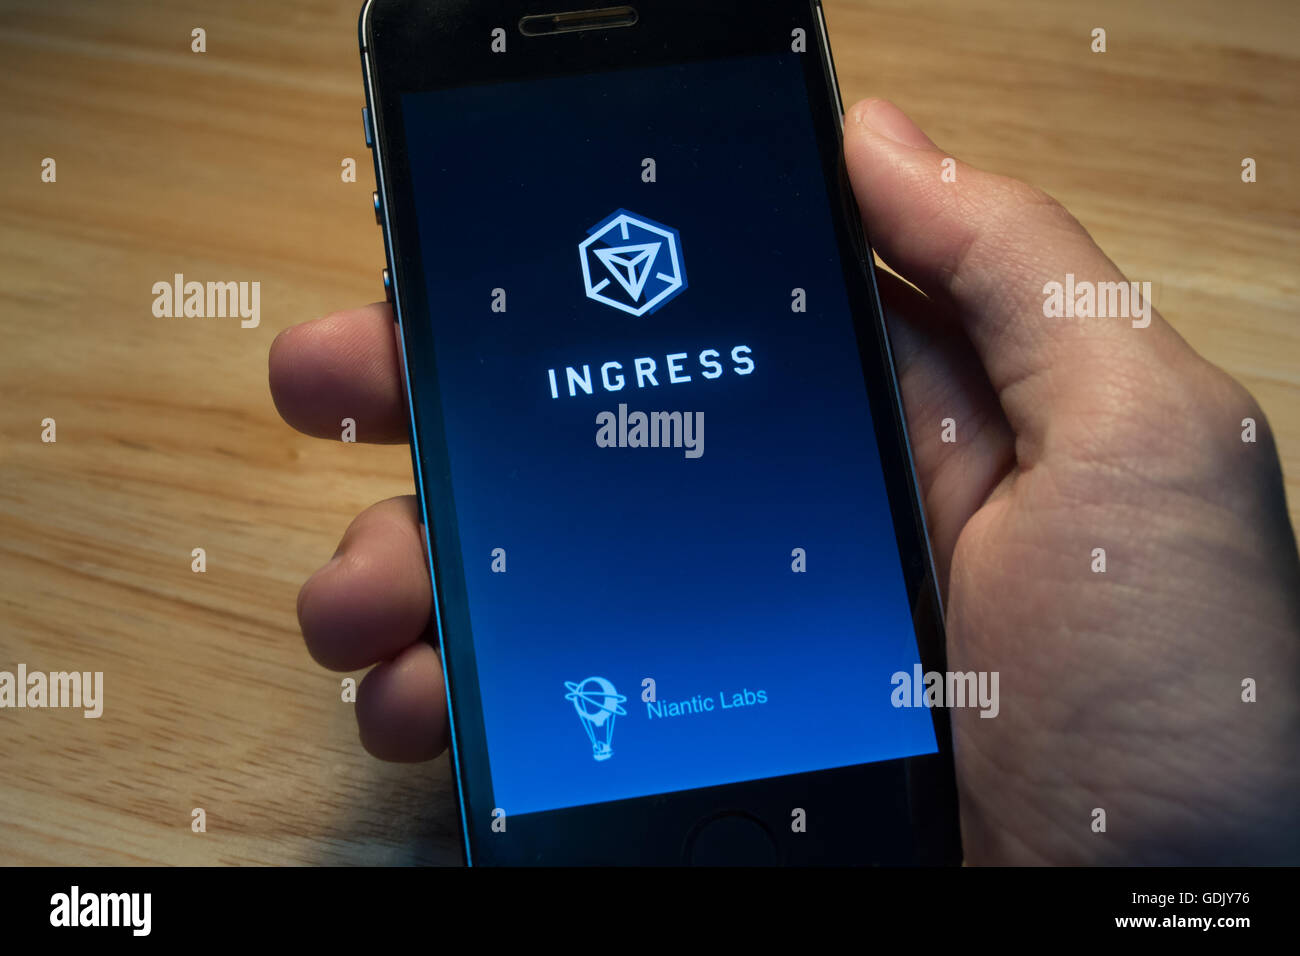 Bangkok, Thailand - July 17, 2016 : Ingress is a game which was developed by Niantic Labs before the coming of Pokemon Go. Stock Photo